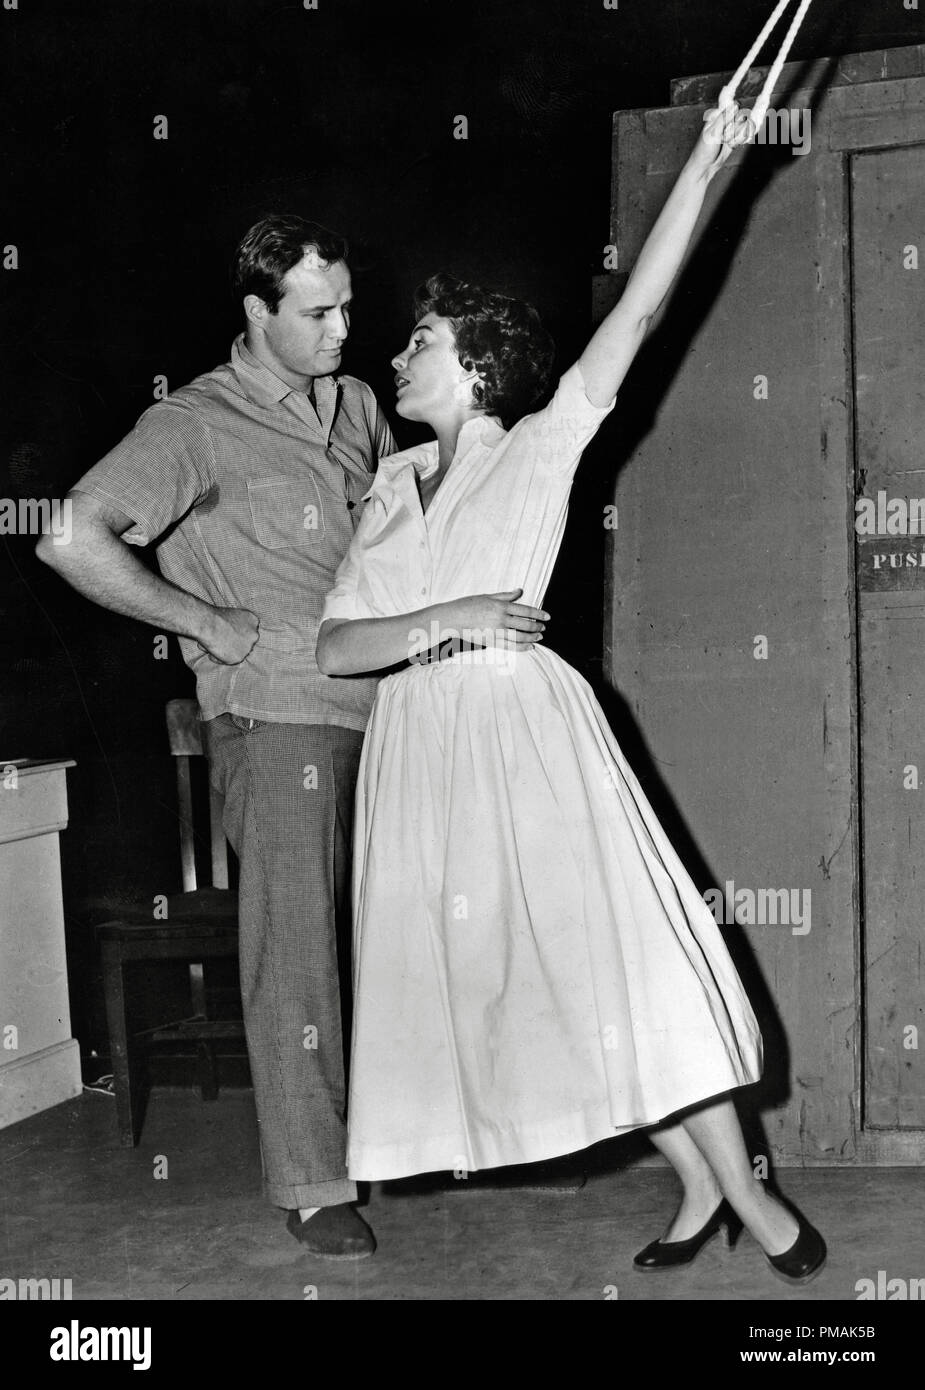 Toestemming Bijzettafeltje Behoren Marlon Brando, Jean Simmons, during the making of "Guys and Dolls" 1955 MGM  File Reference # 33300 235THA Stock Photo - Alamy